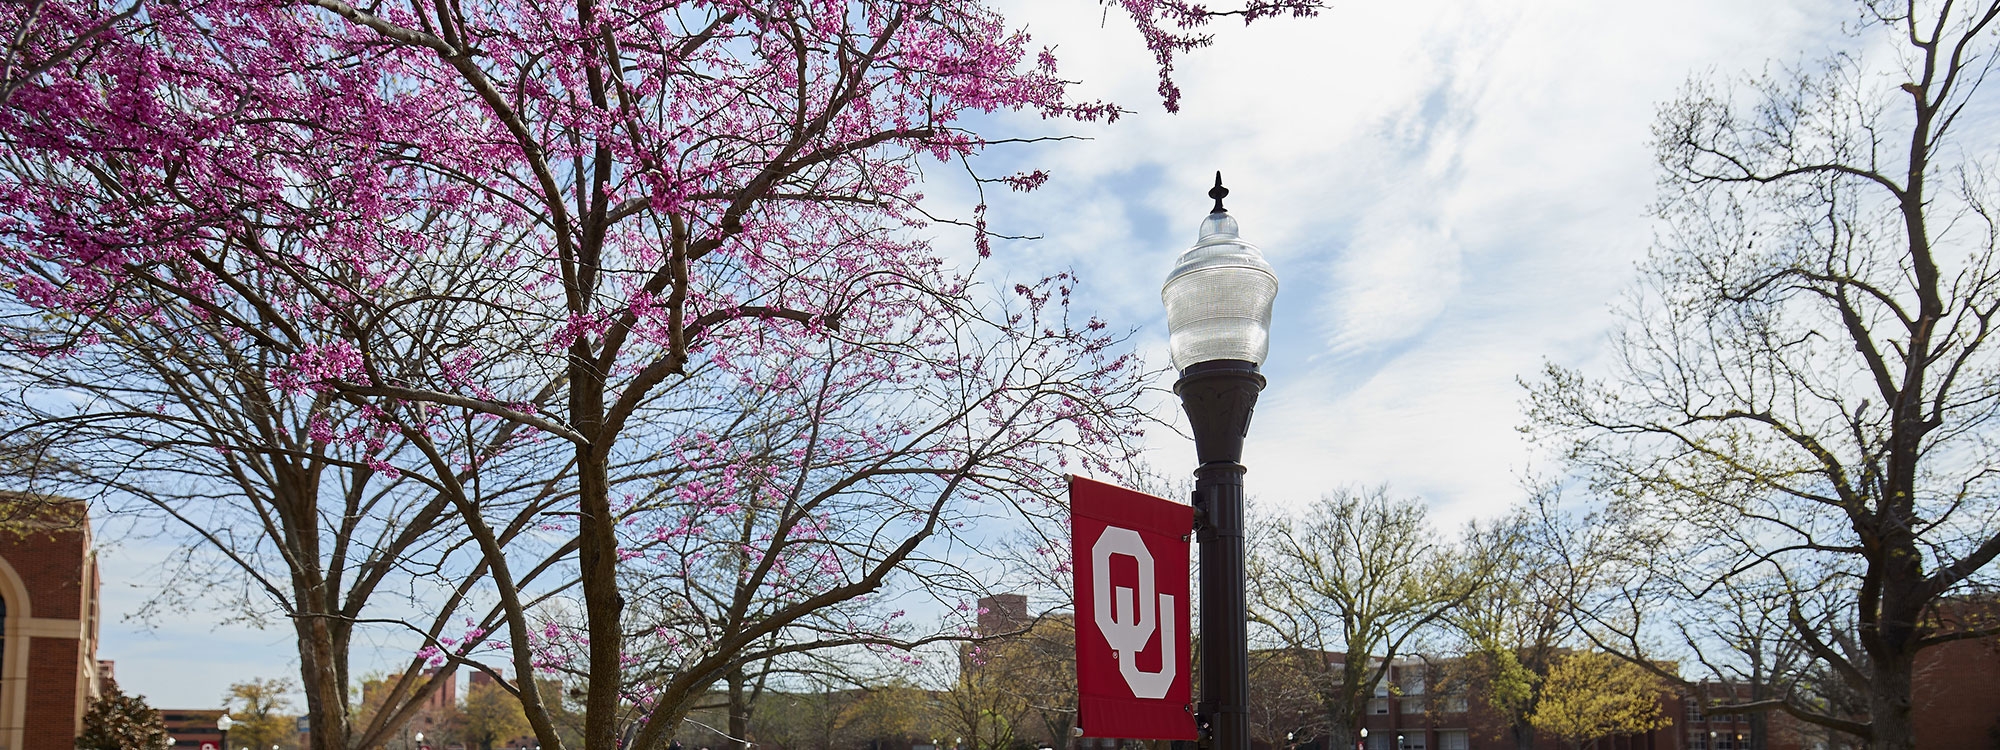 Redbud trees blossoming in spring and a lamppost with an OU flag.